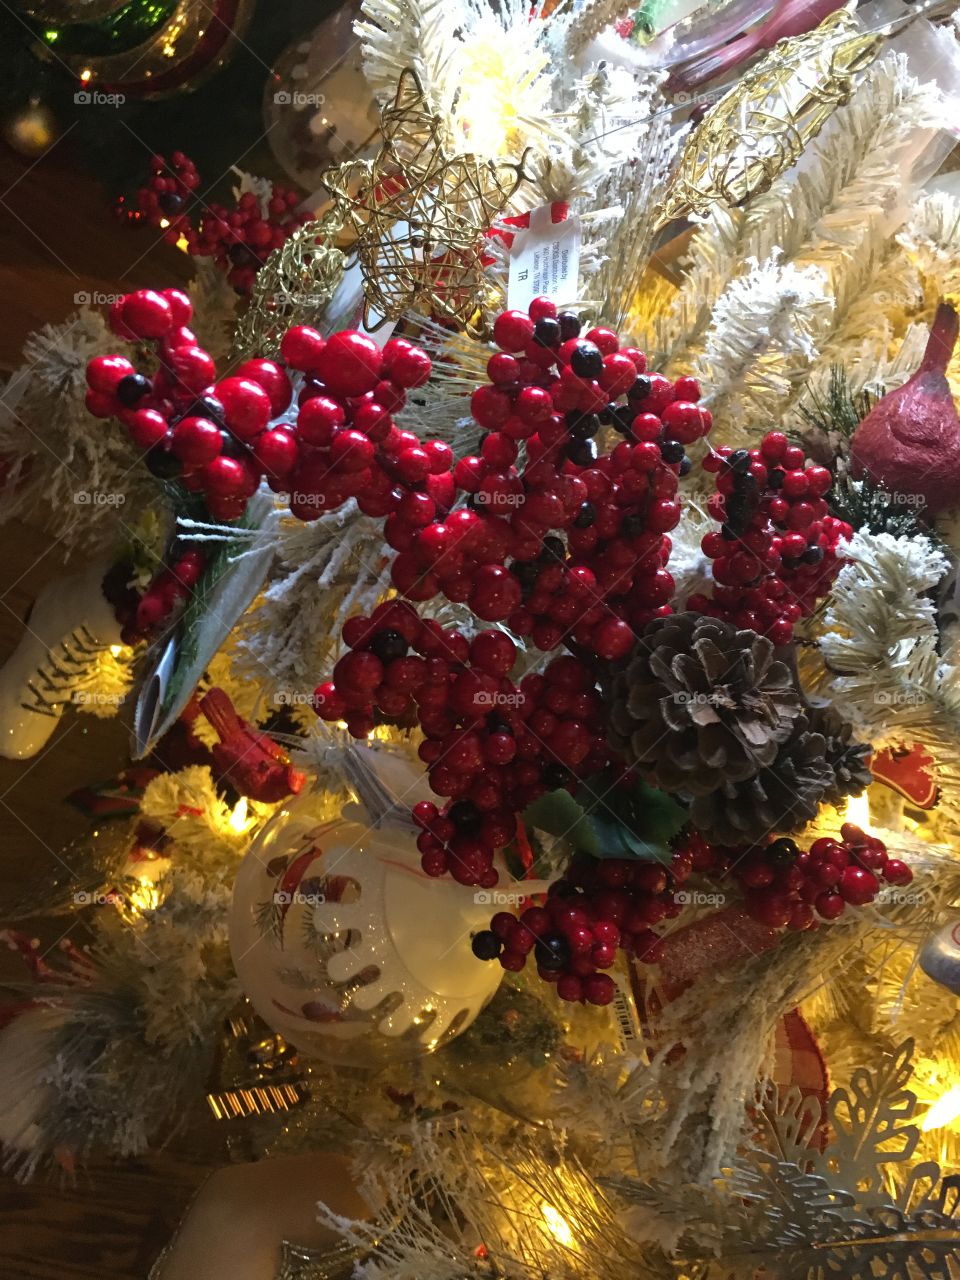 Red holly berries and gold tinsel 